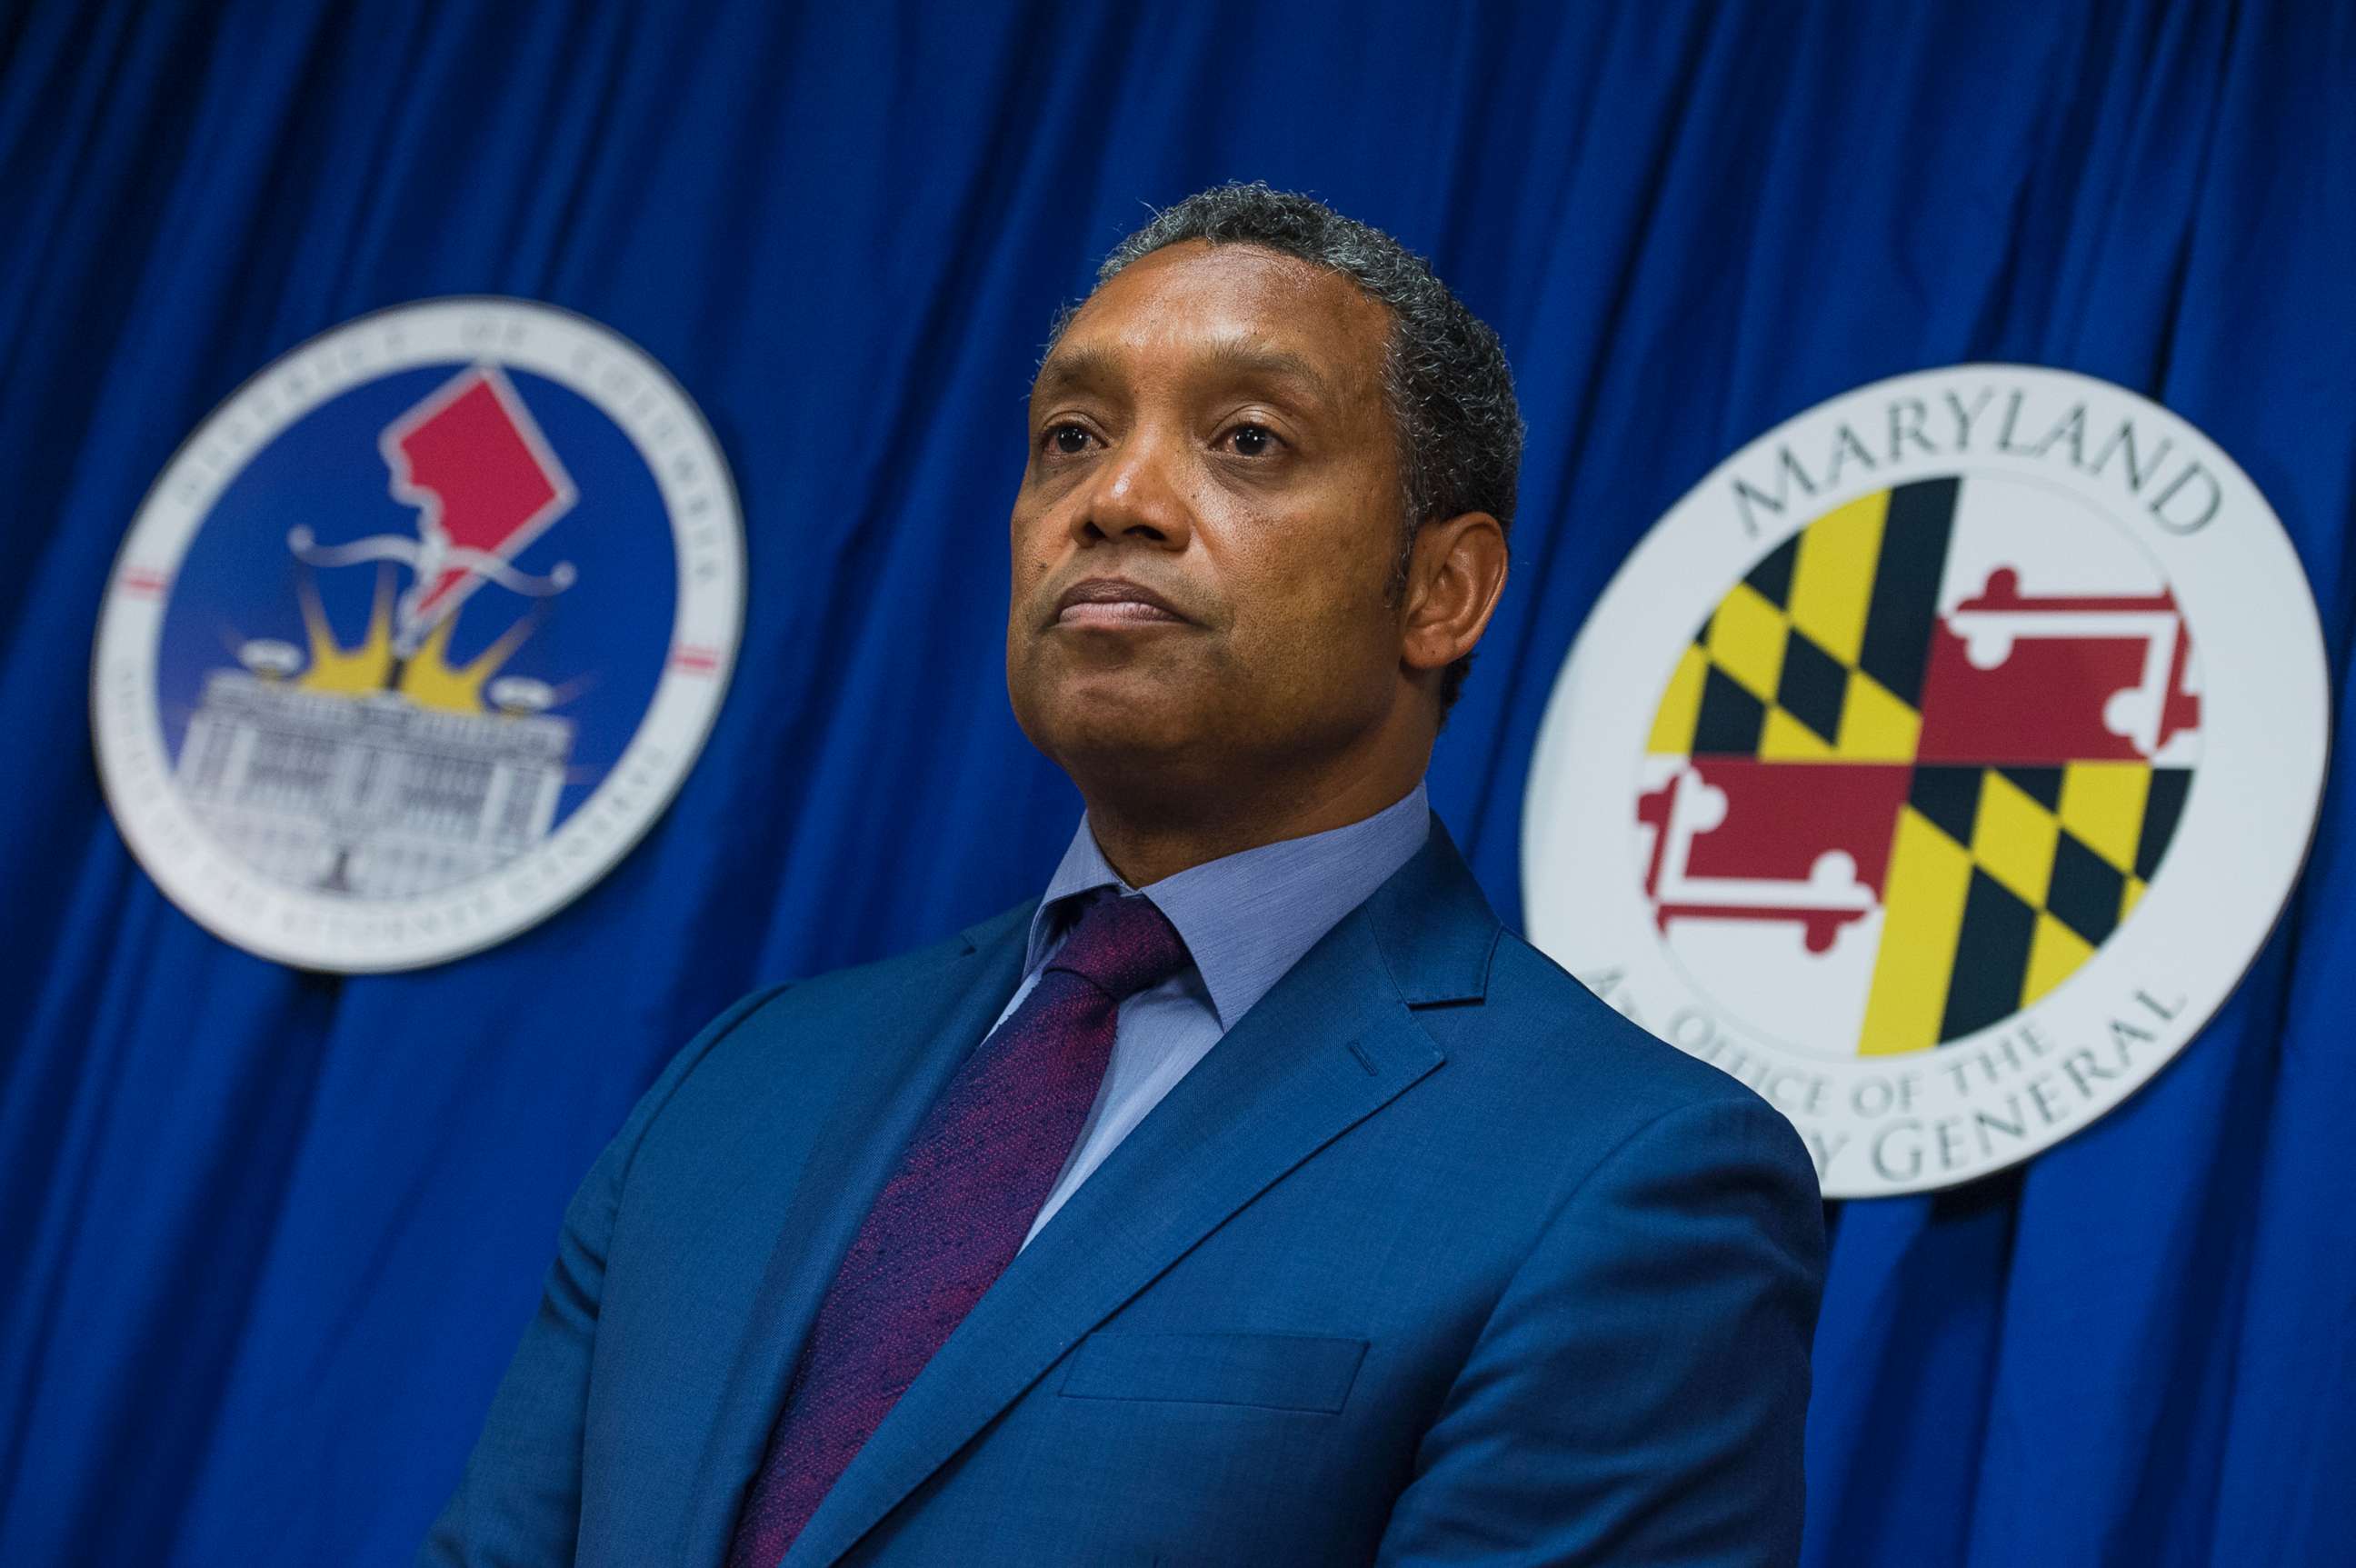 PHOTO: District of Columbia Attorney General Karl Racine at a news conference on June 12, 2017, in Washington.